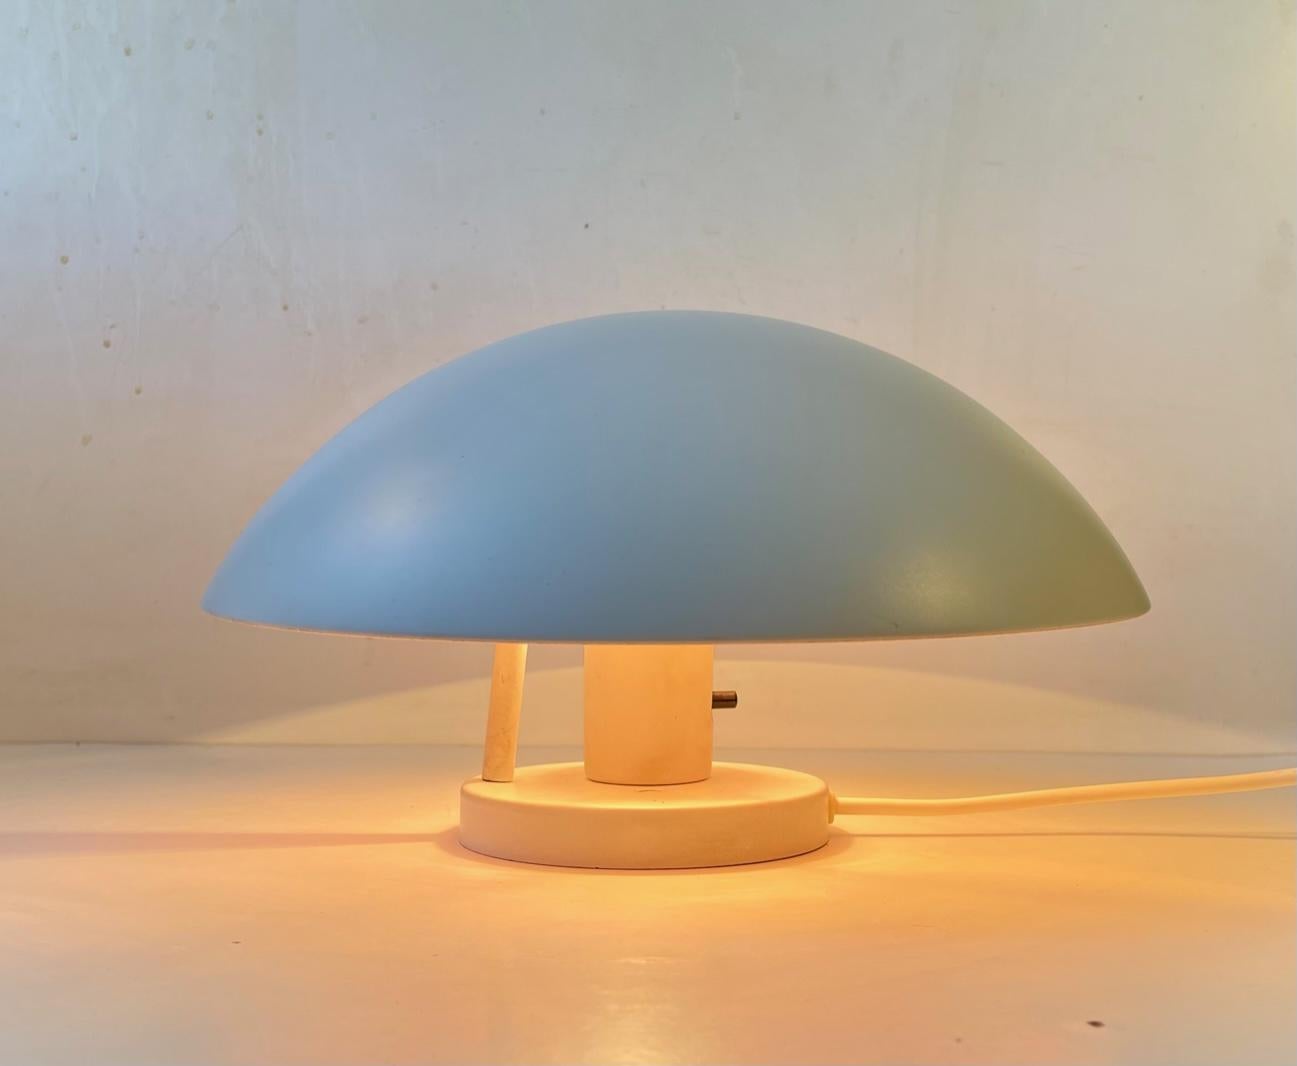 2st series large white PH hat wall lamp (D:30cm) designed by Poul Henningsen in the late 1970s and manufactured by Louis Poulsen in Denmark. It features angle-adjustable shade, original pink lacquer and push-pin on/of switch to the socket. Its